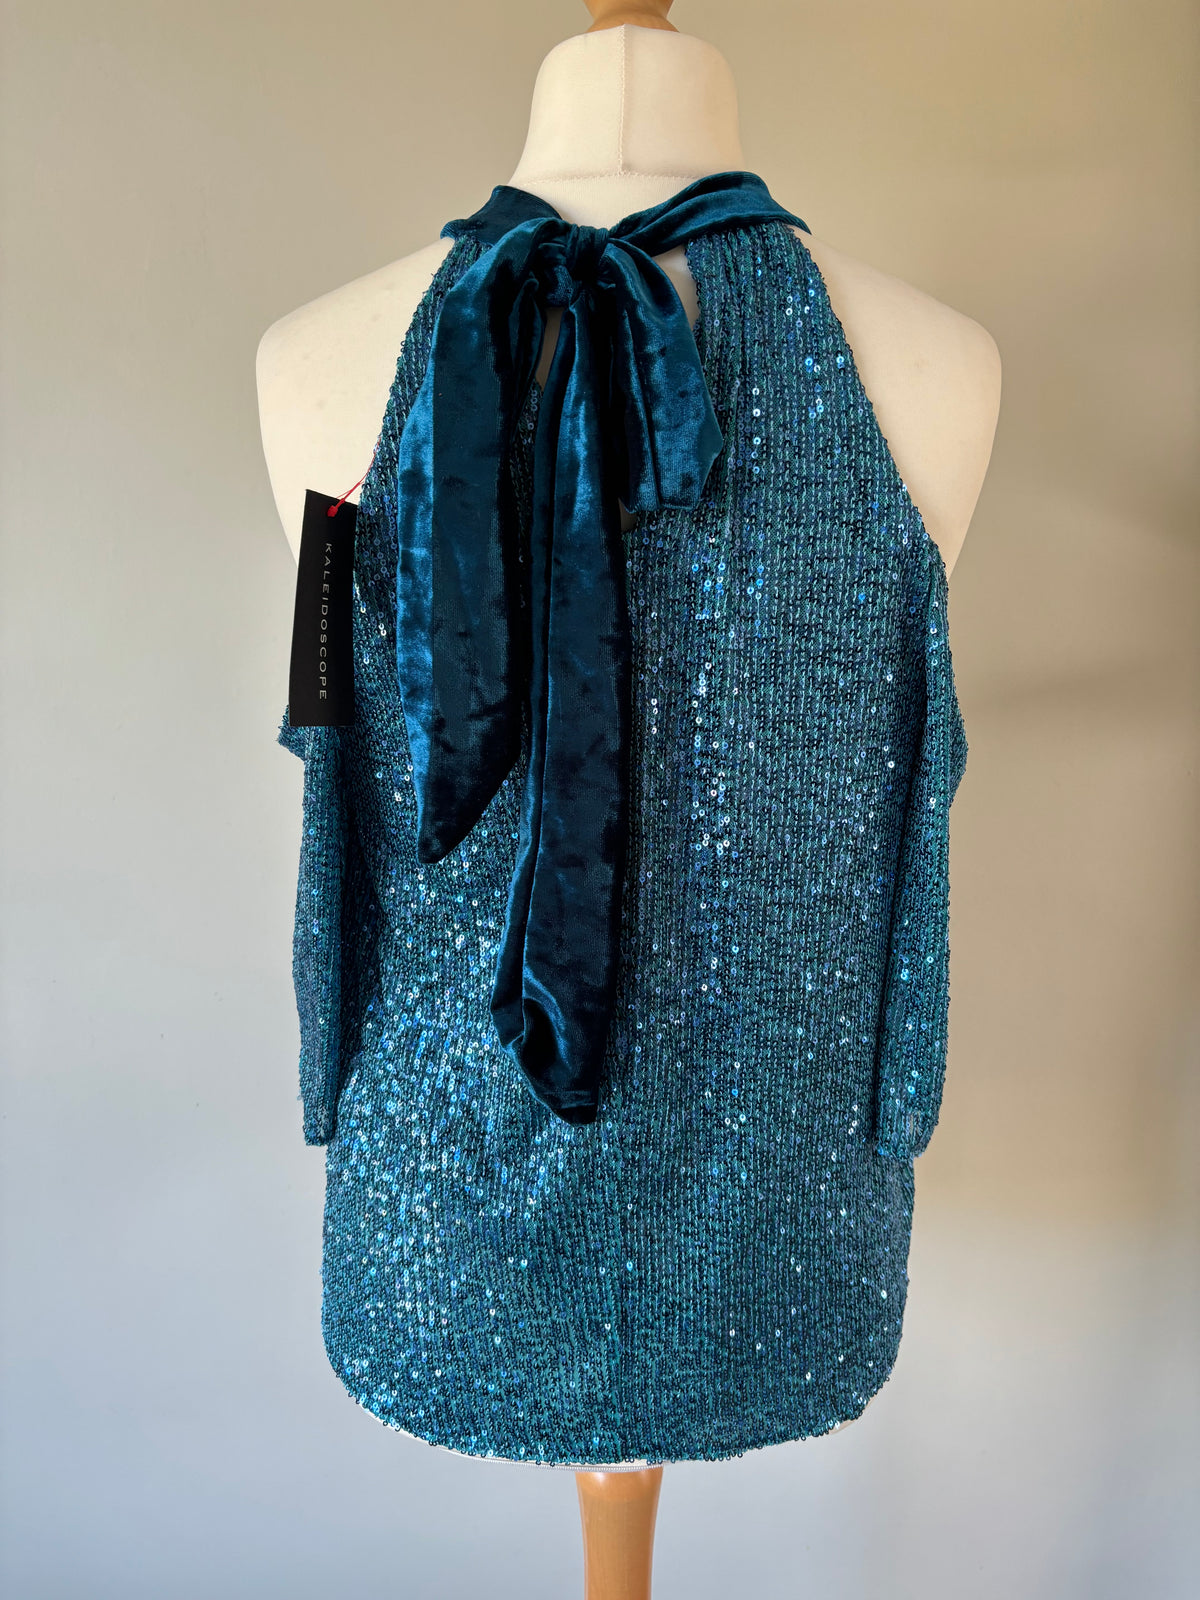 Blue Sequin Cold Shoulder Top by Kaleidoscope Size 14